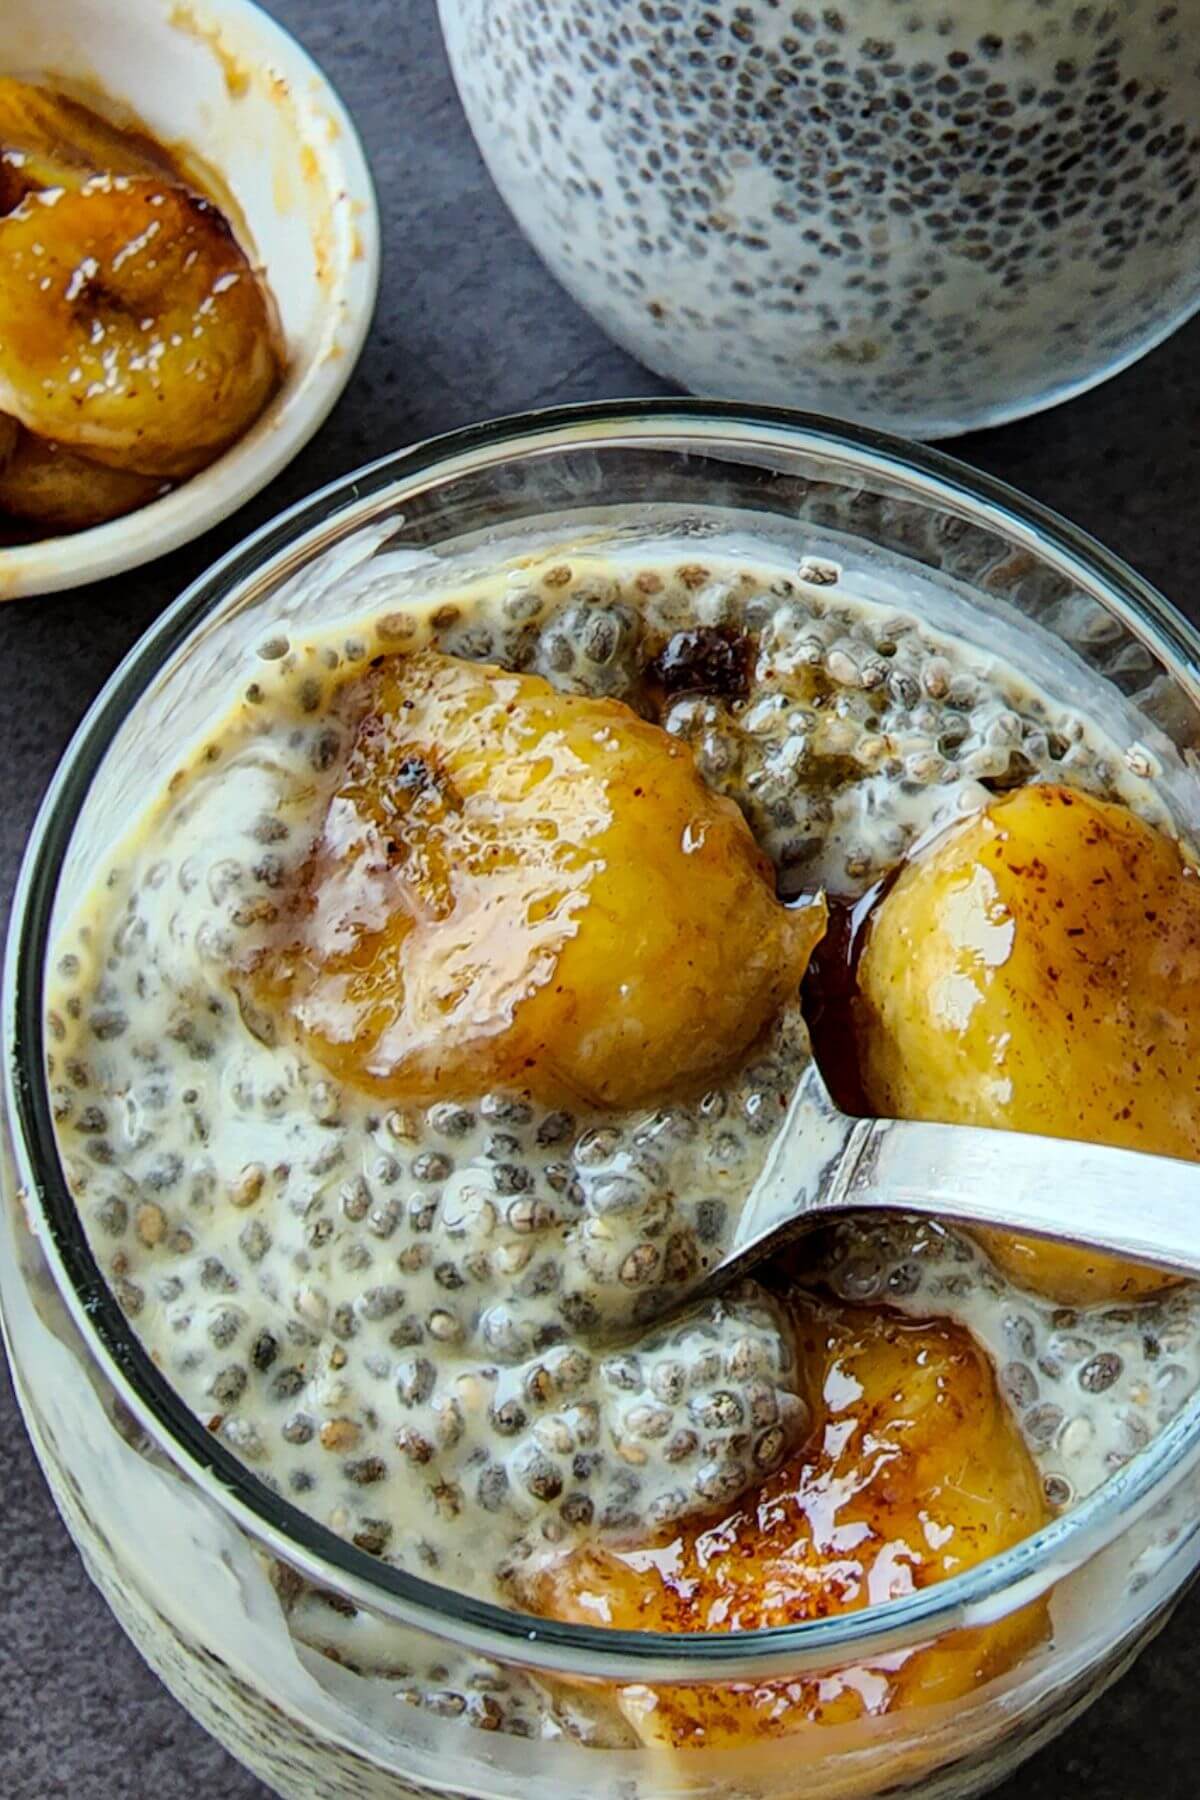 Chia pudding with caramelized bananas in a glass.